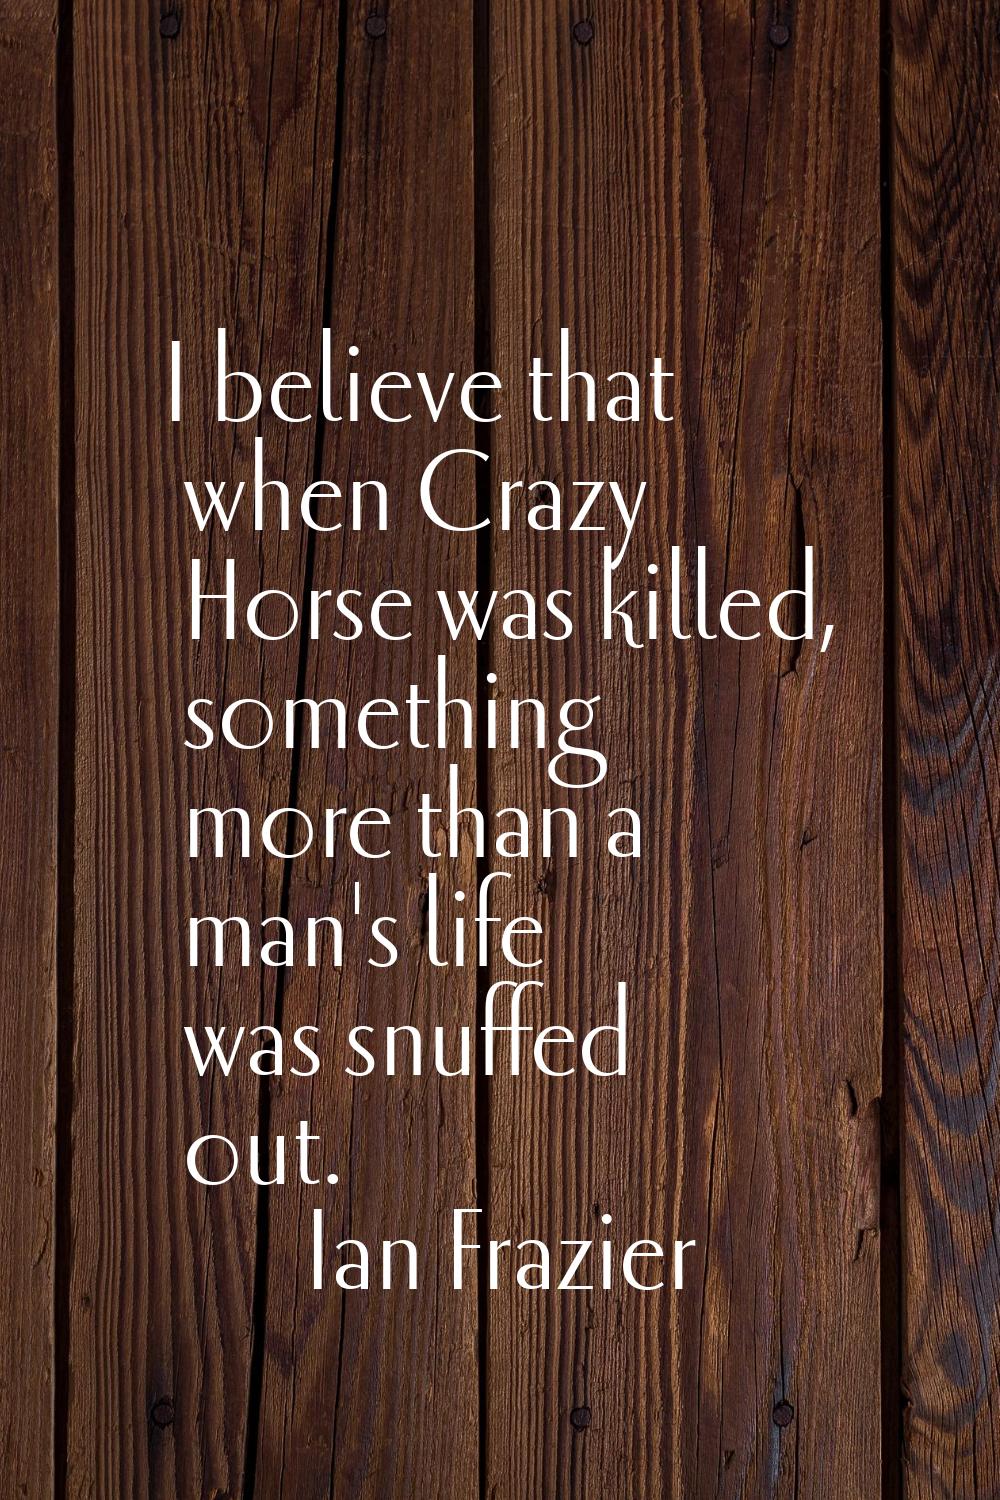 I believe that when Crazy Horse was killed, something more than a man's life was snuffed out.